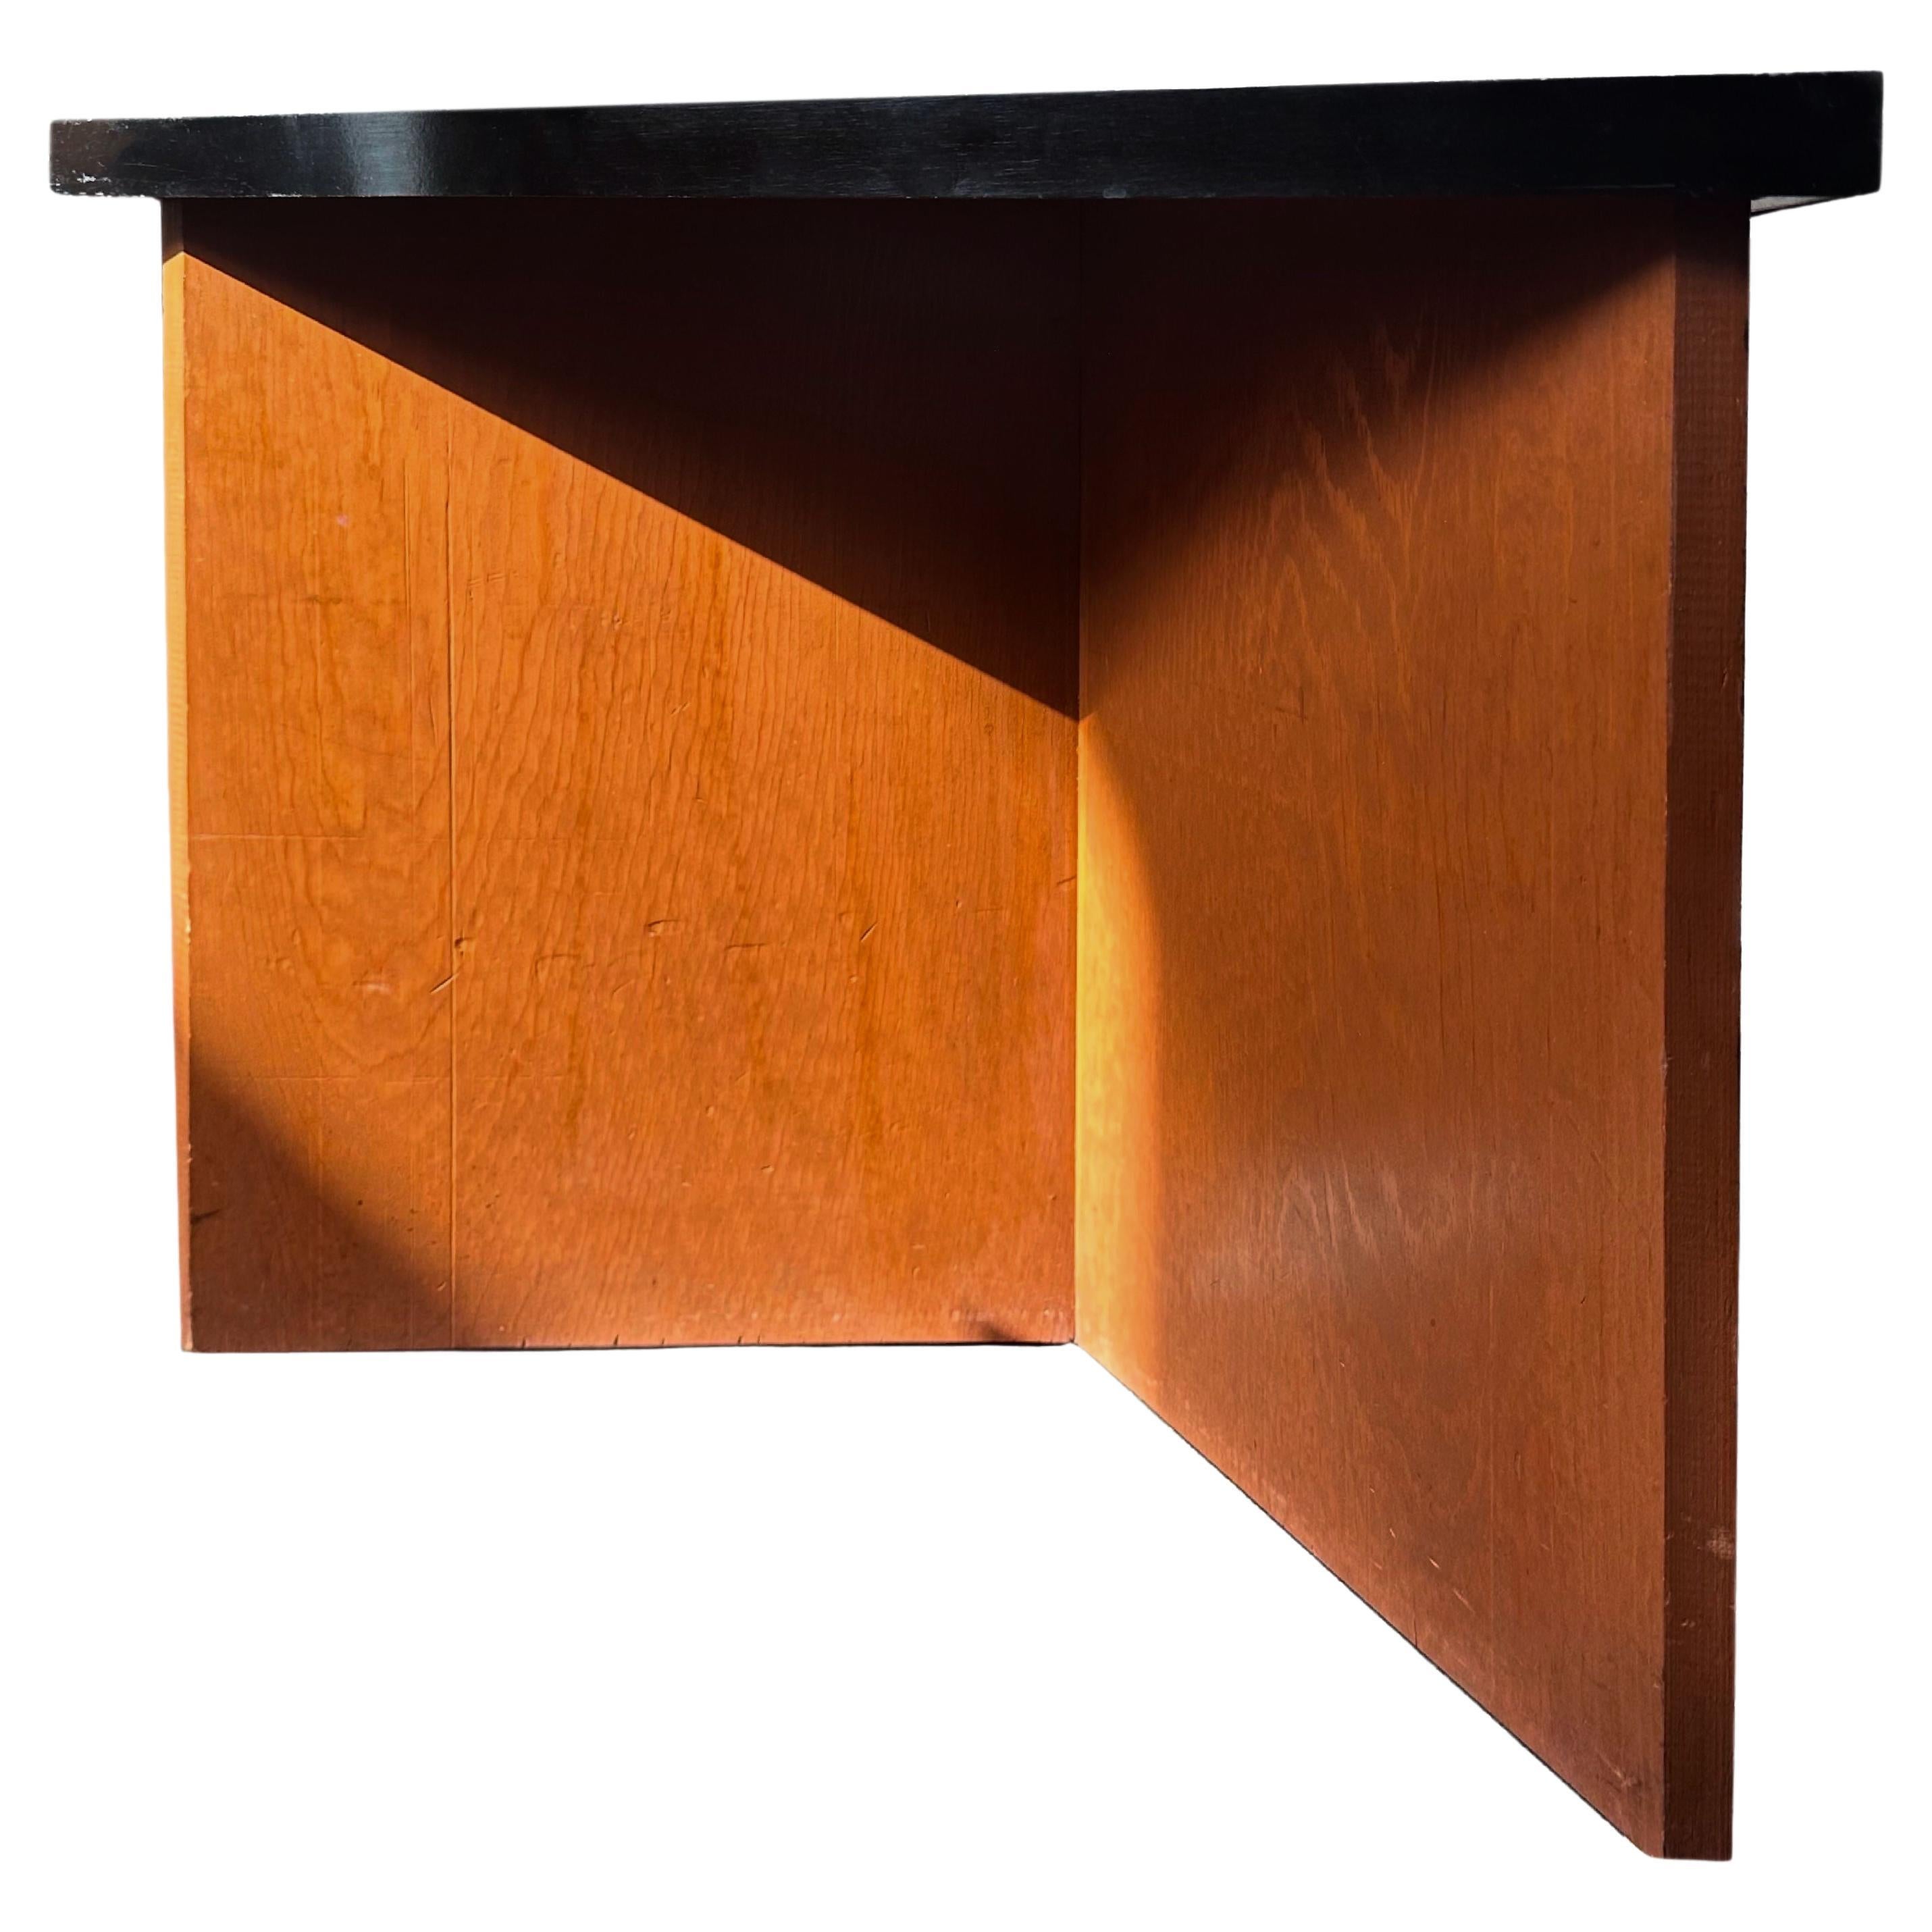 Frank Lloyd wright, Arnold house modular side table, Triangular, 1954. This listing is for one table.   The tables can be used together as a coffee table, two or three side tables or, of course, independently. These were designed by Frank Lloyd